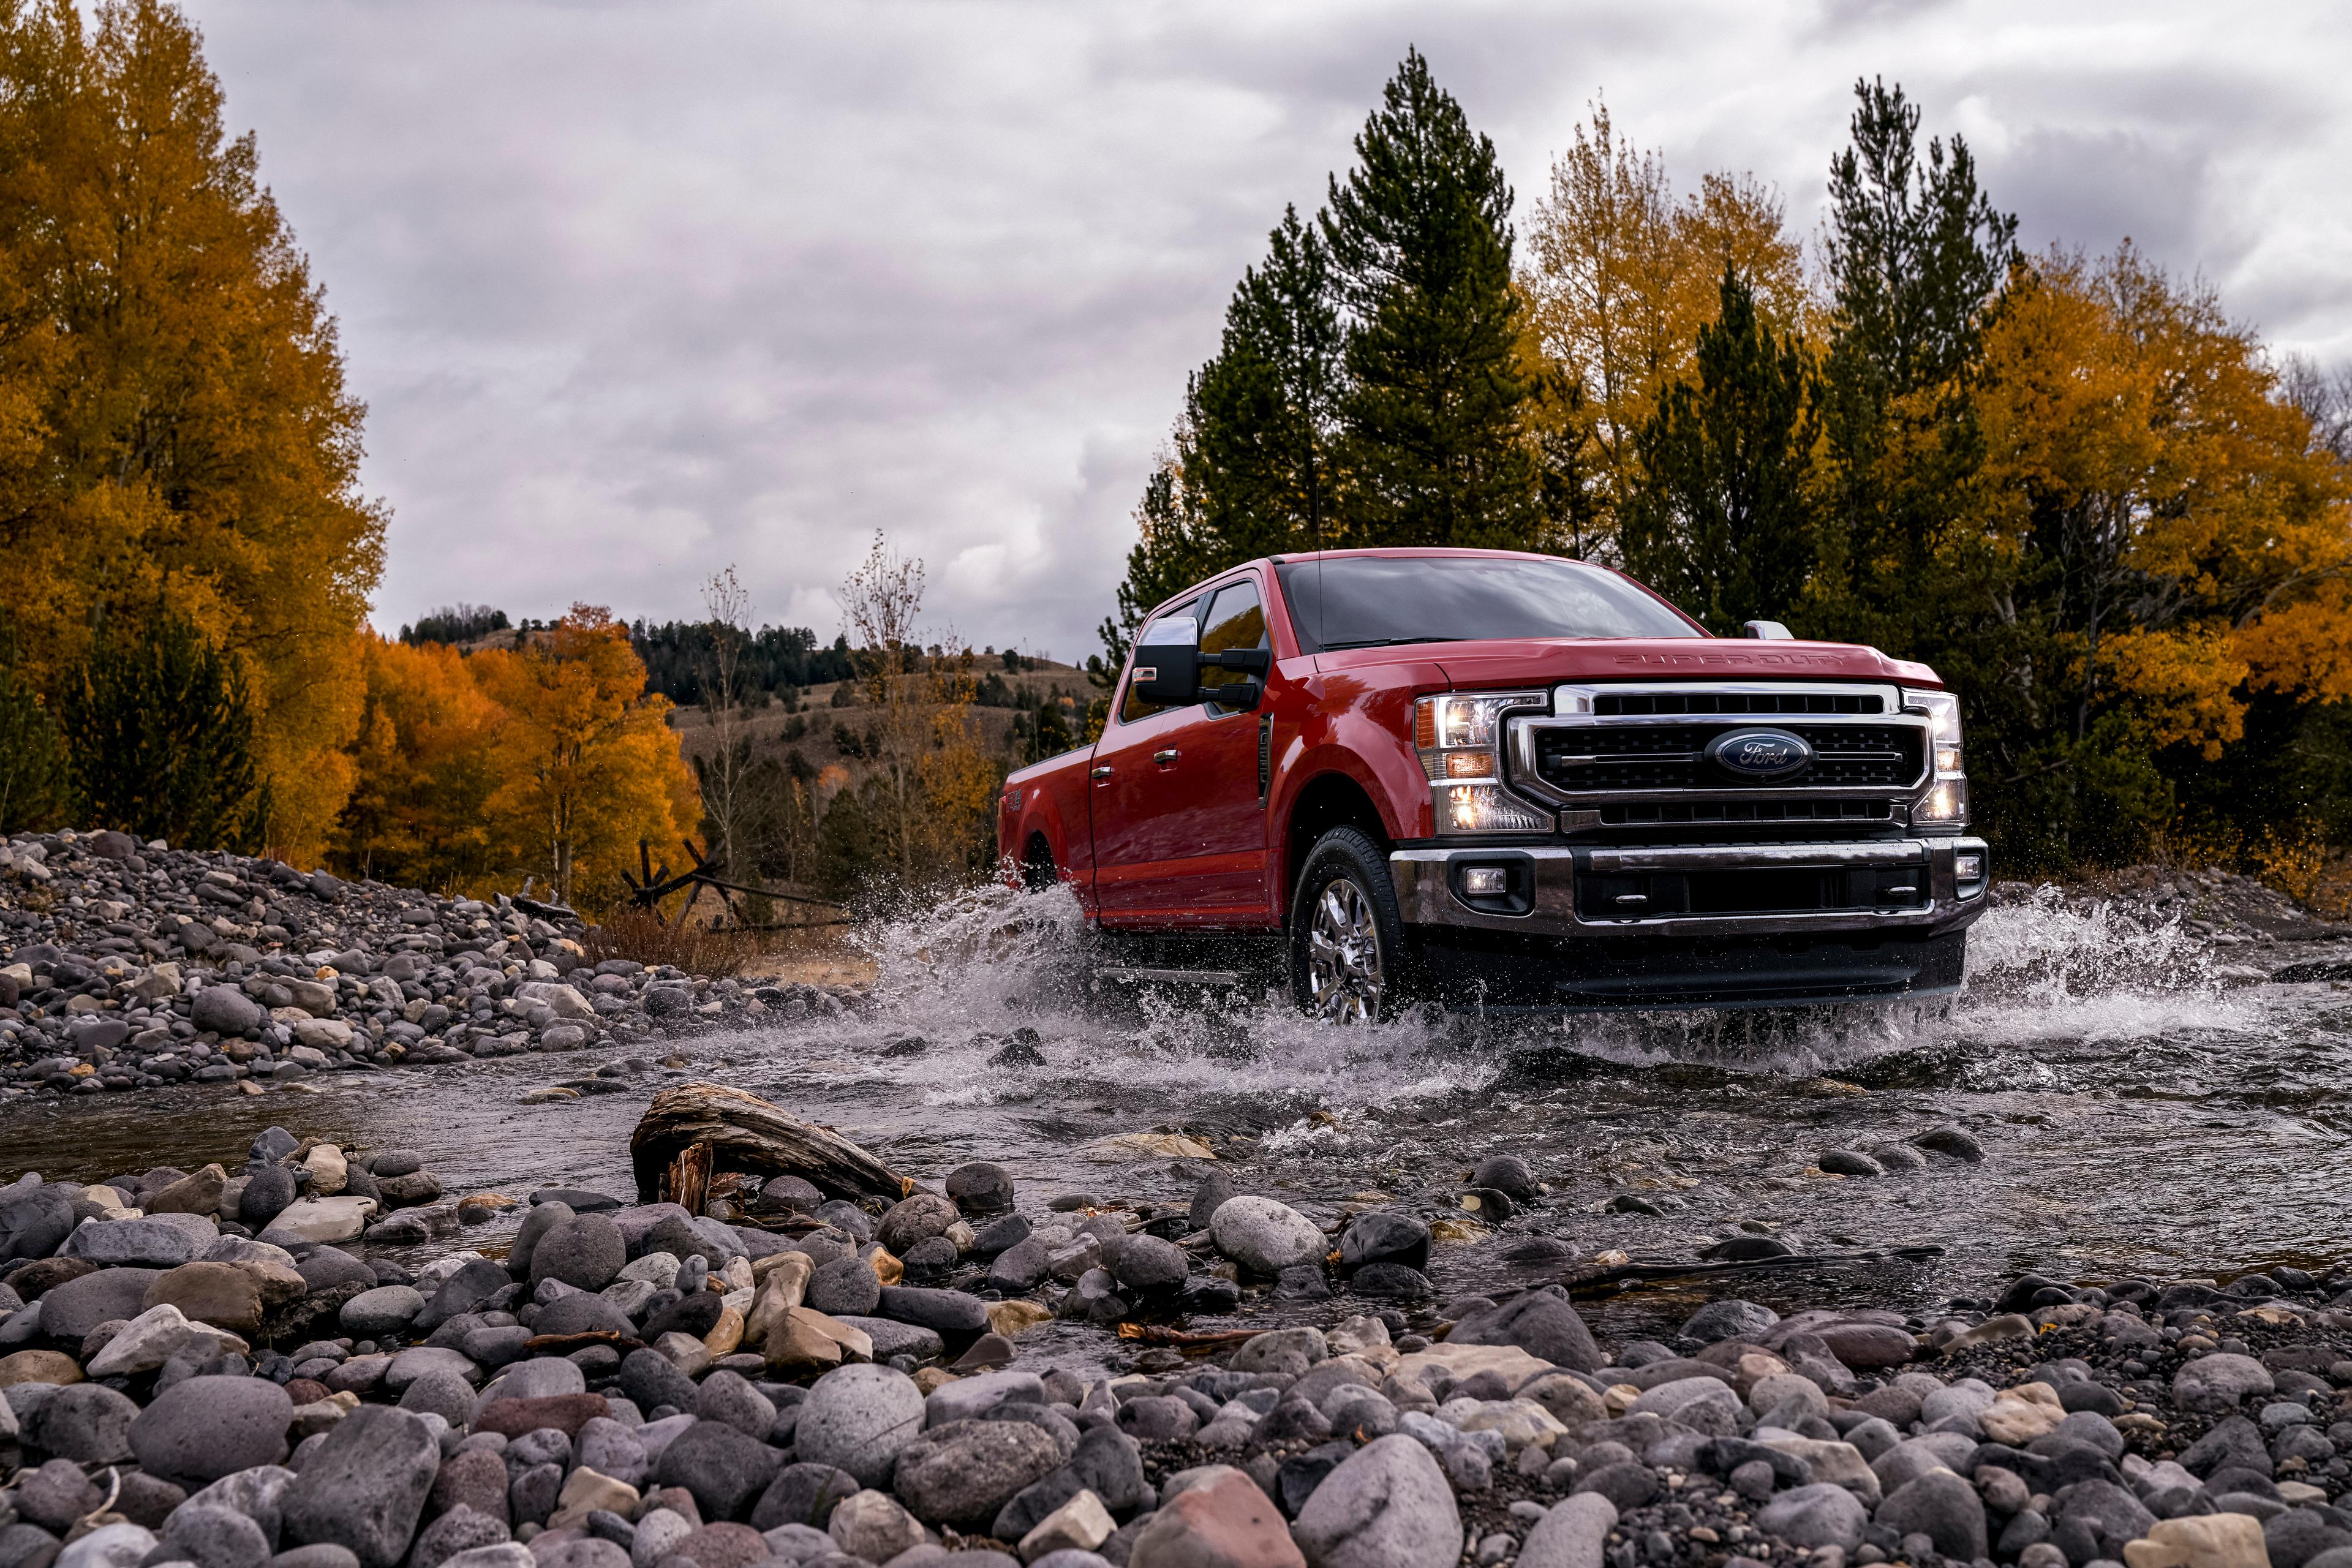 Image of a red F-250 courtesy of Ford.